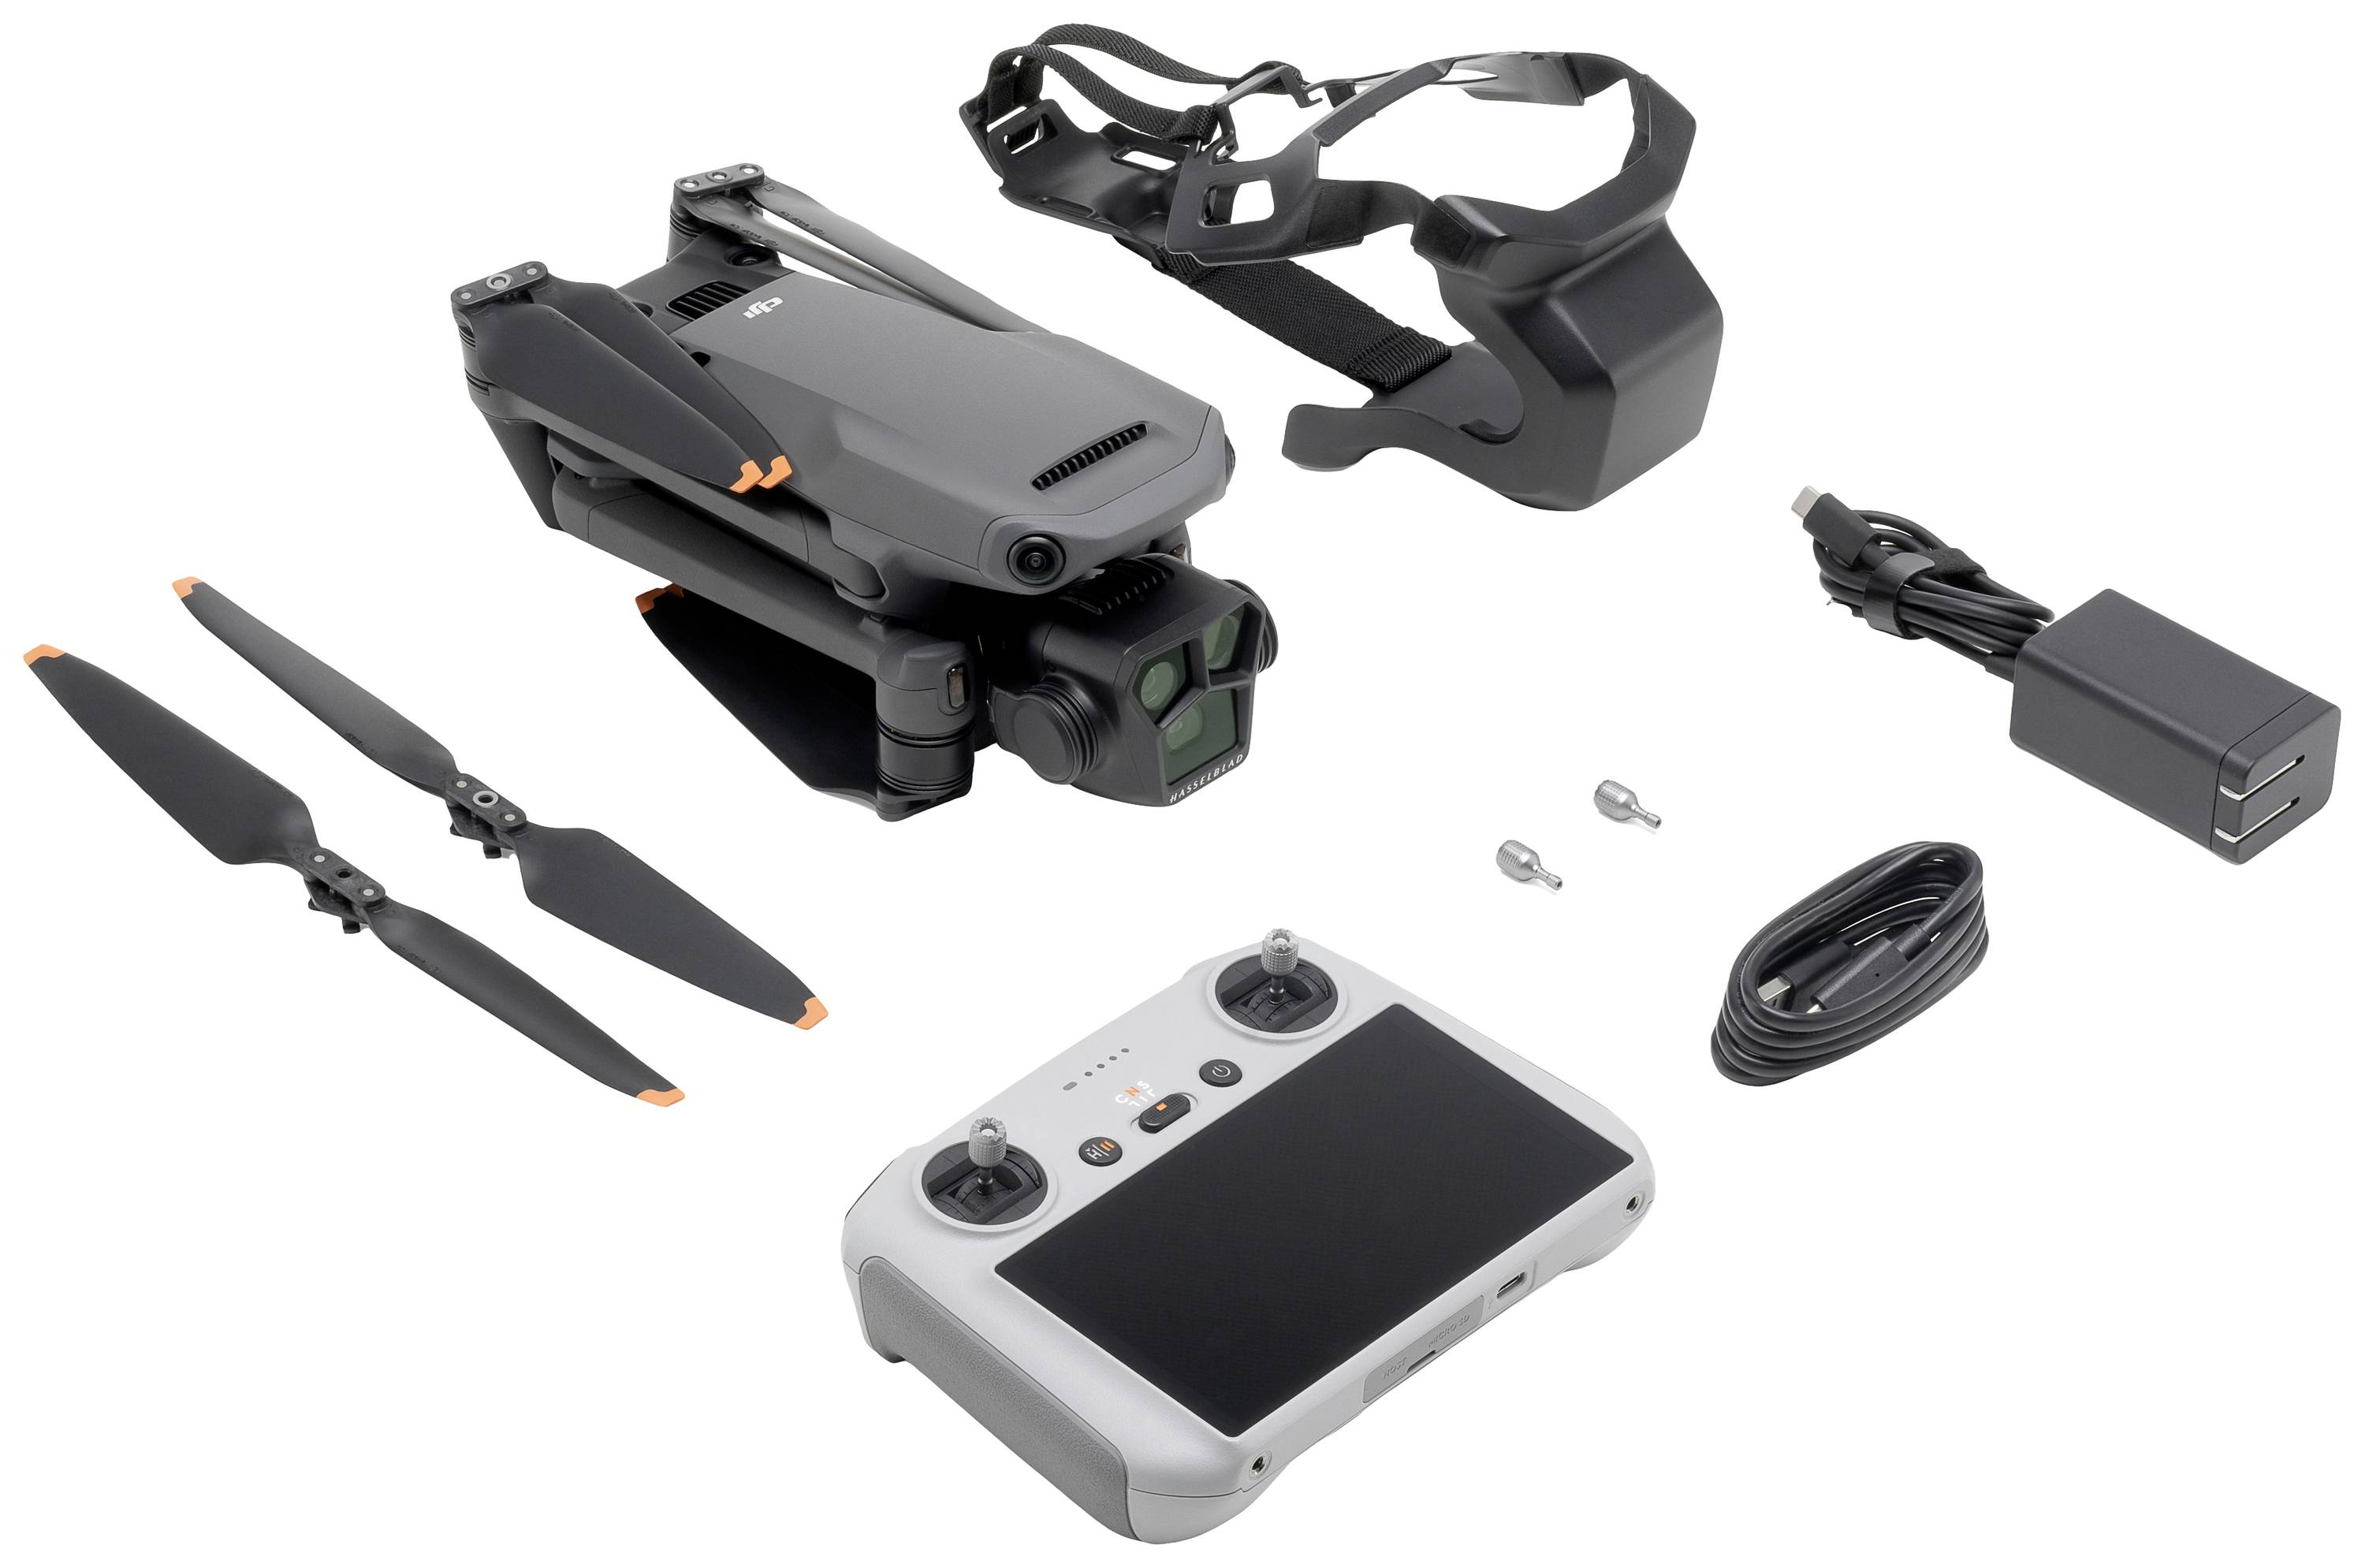 How to Pair the DJI RC Pro Controller with DJI Drone (Step-by-Step